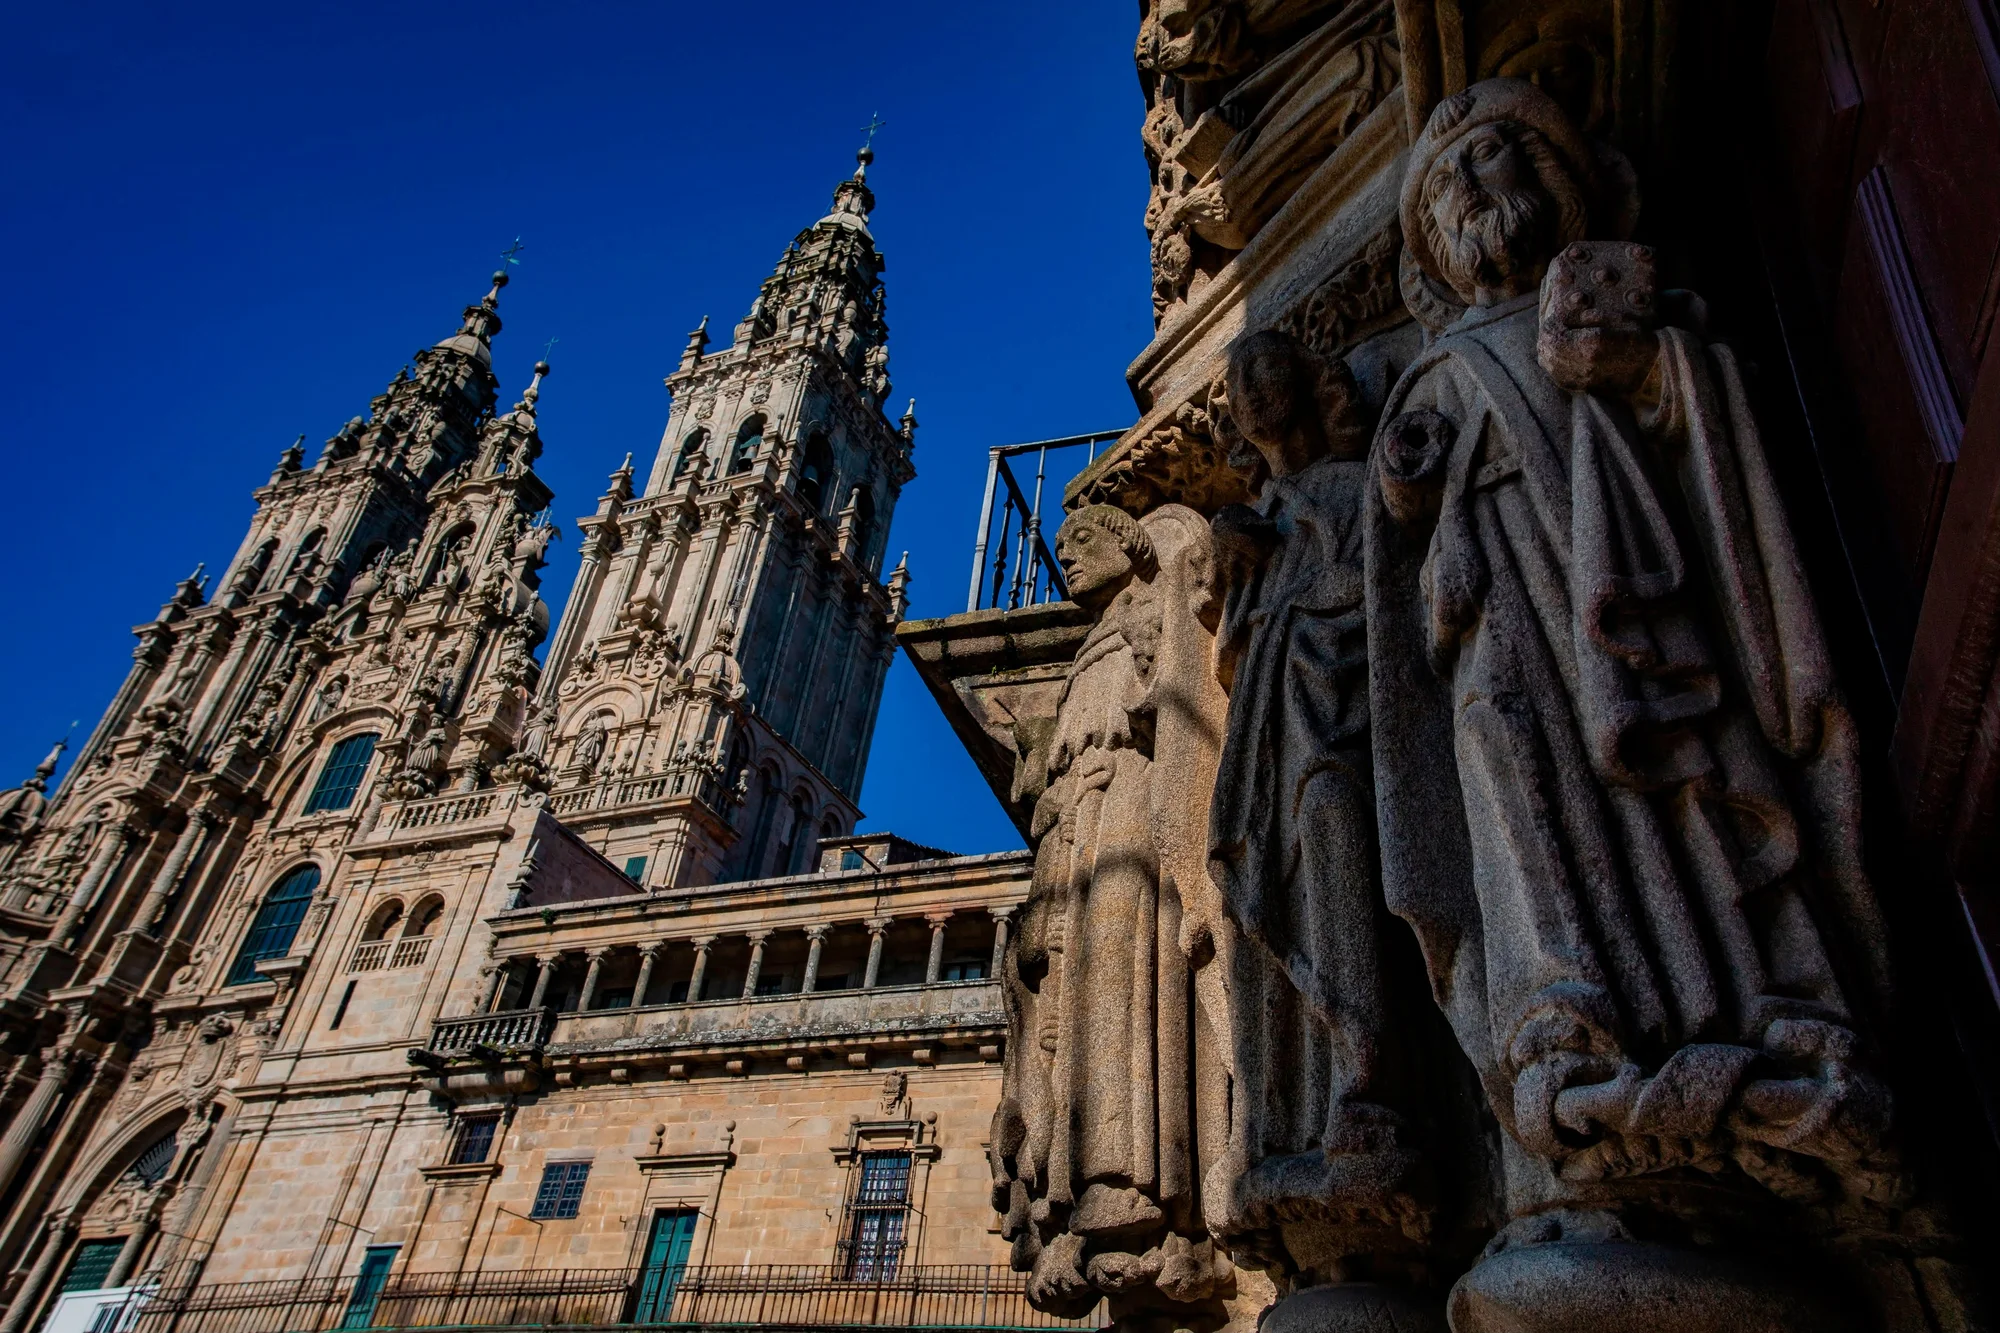 A photograph of the Cathedral of Santiago de Compostela in which can be seen in the foreground, two stone statues, and in the background, the facade of the Obradoiro of the Cathedral.